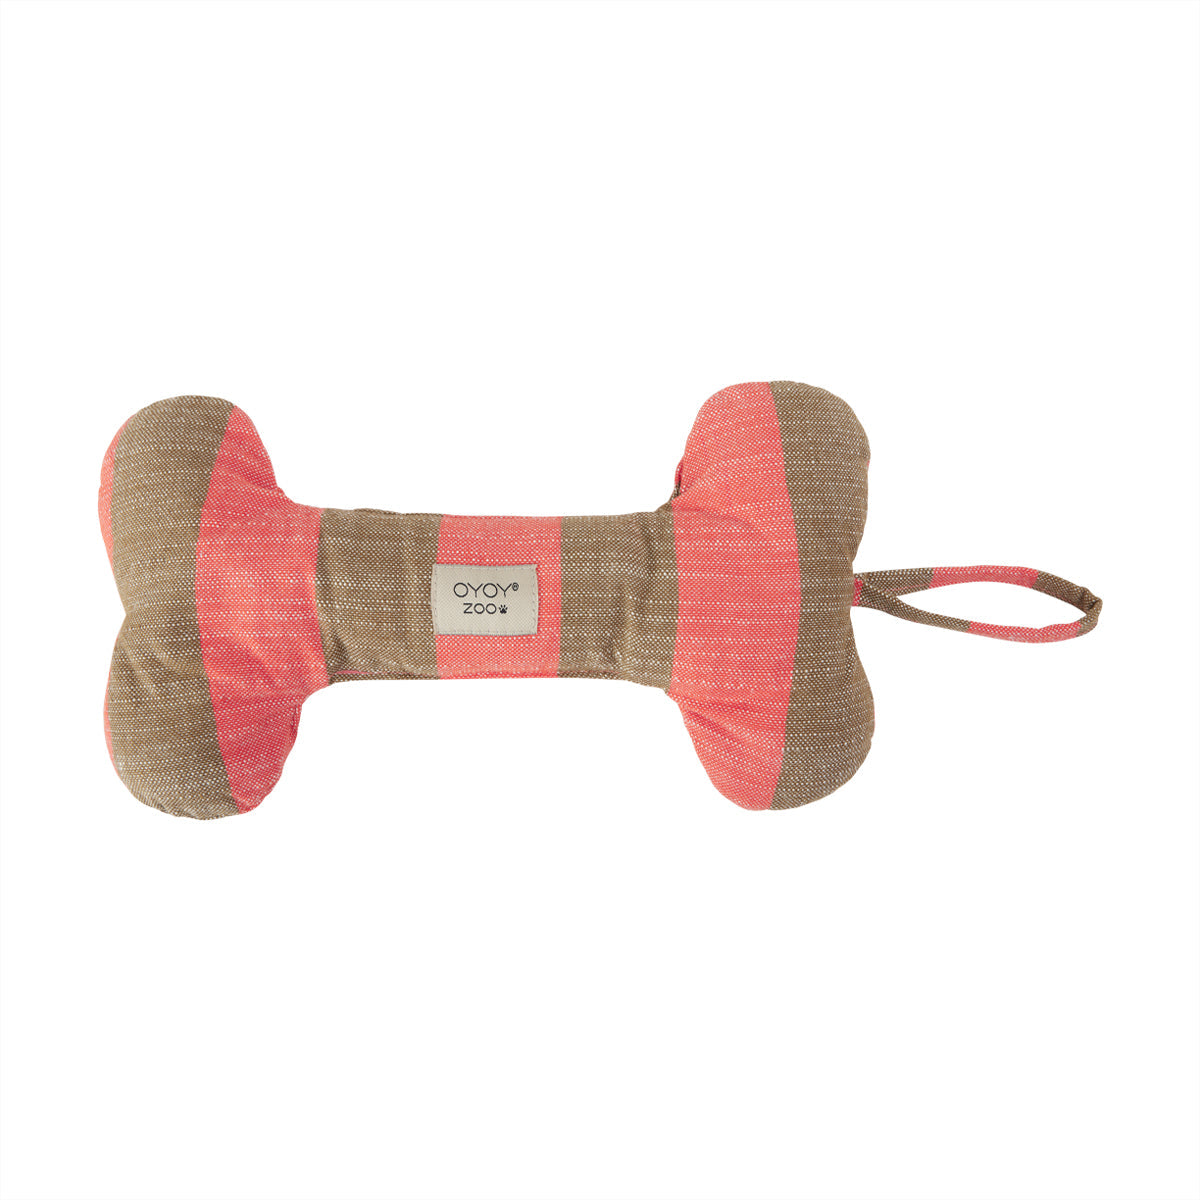 OYOY ZOO Ashi Dog Toy - Large Let's Play 405 Cherry Red / Taupe